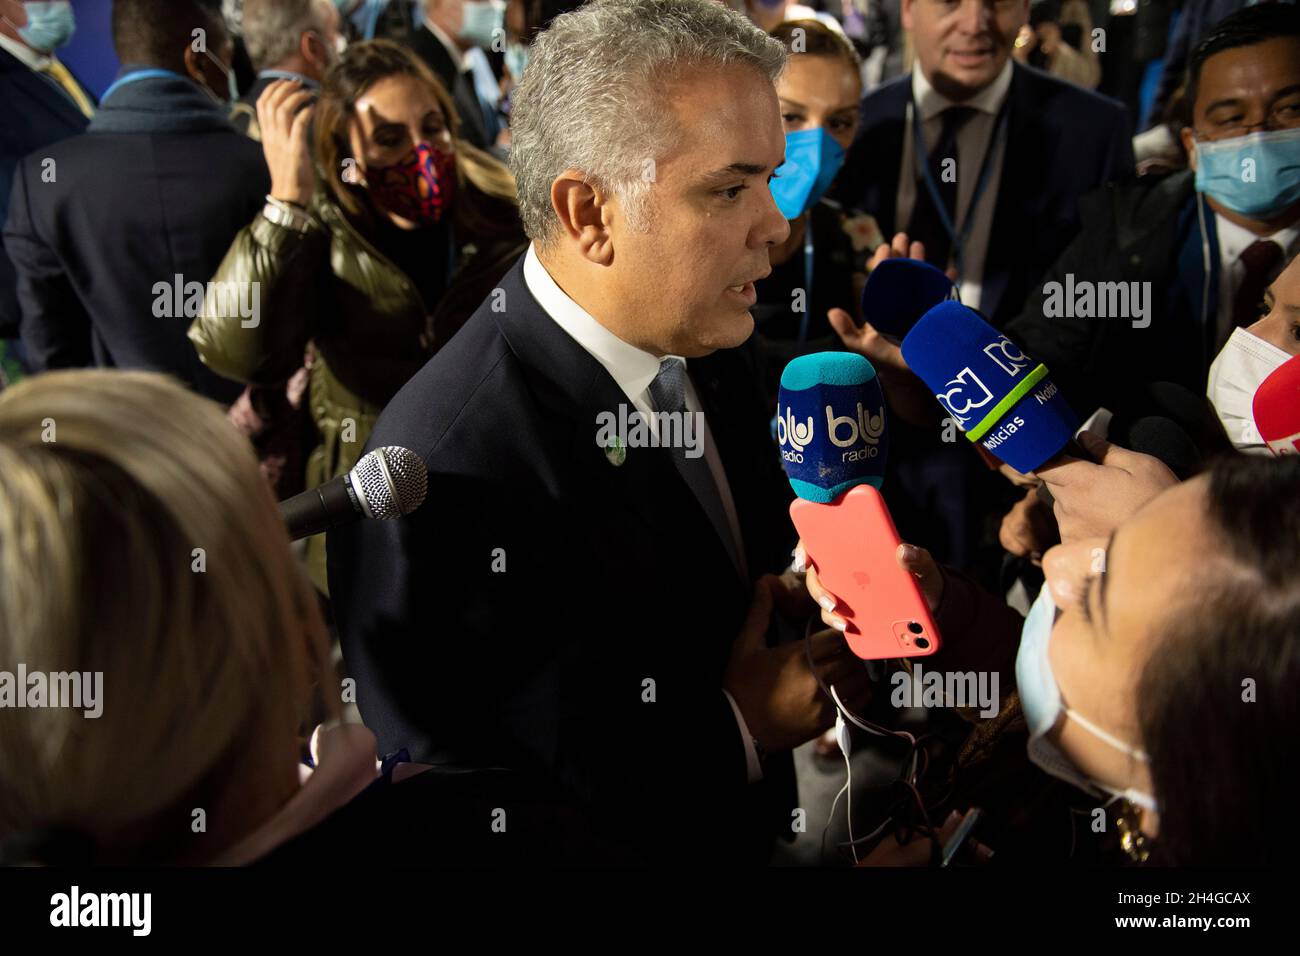 Glasgow, Scotland, UK. 2nd Nov, 2021. PICTURED: Iván Duque Márquez, Prime Minister of Columbia, seen at the COP26 Climate Change Conference in Glasgow this afternoon. Credit: Colin Fisher/Alamy Live News Stock Photo